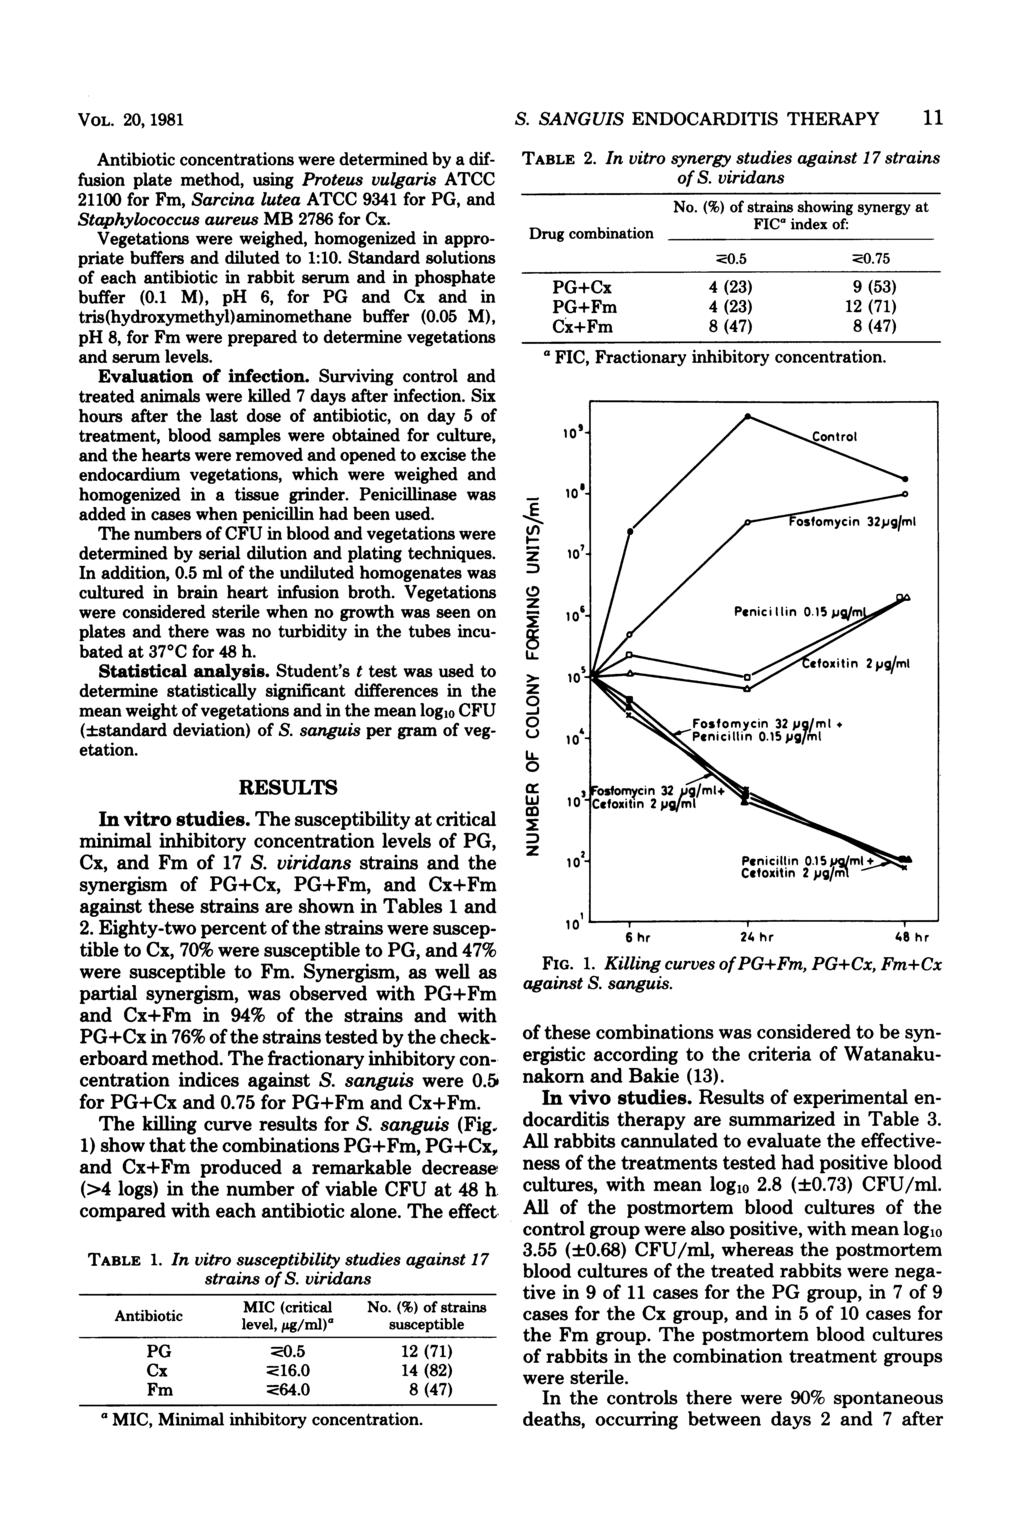 VOL. 2, 1981 Antibiotic concentrations were determined by a diffusion plate method, using Proteus vulgaris ATCC 211 for Fm, Sarcina lutea ATCC 9341 for PG, and Staphylococcus aureus MB 2786 for Cx.